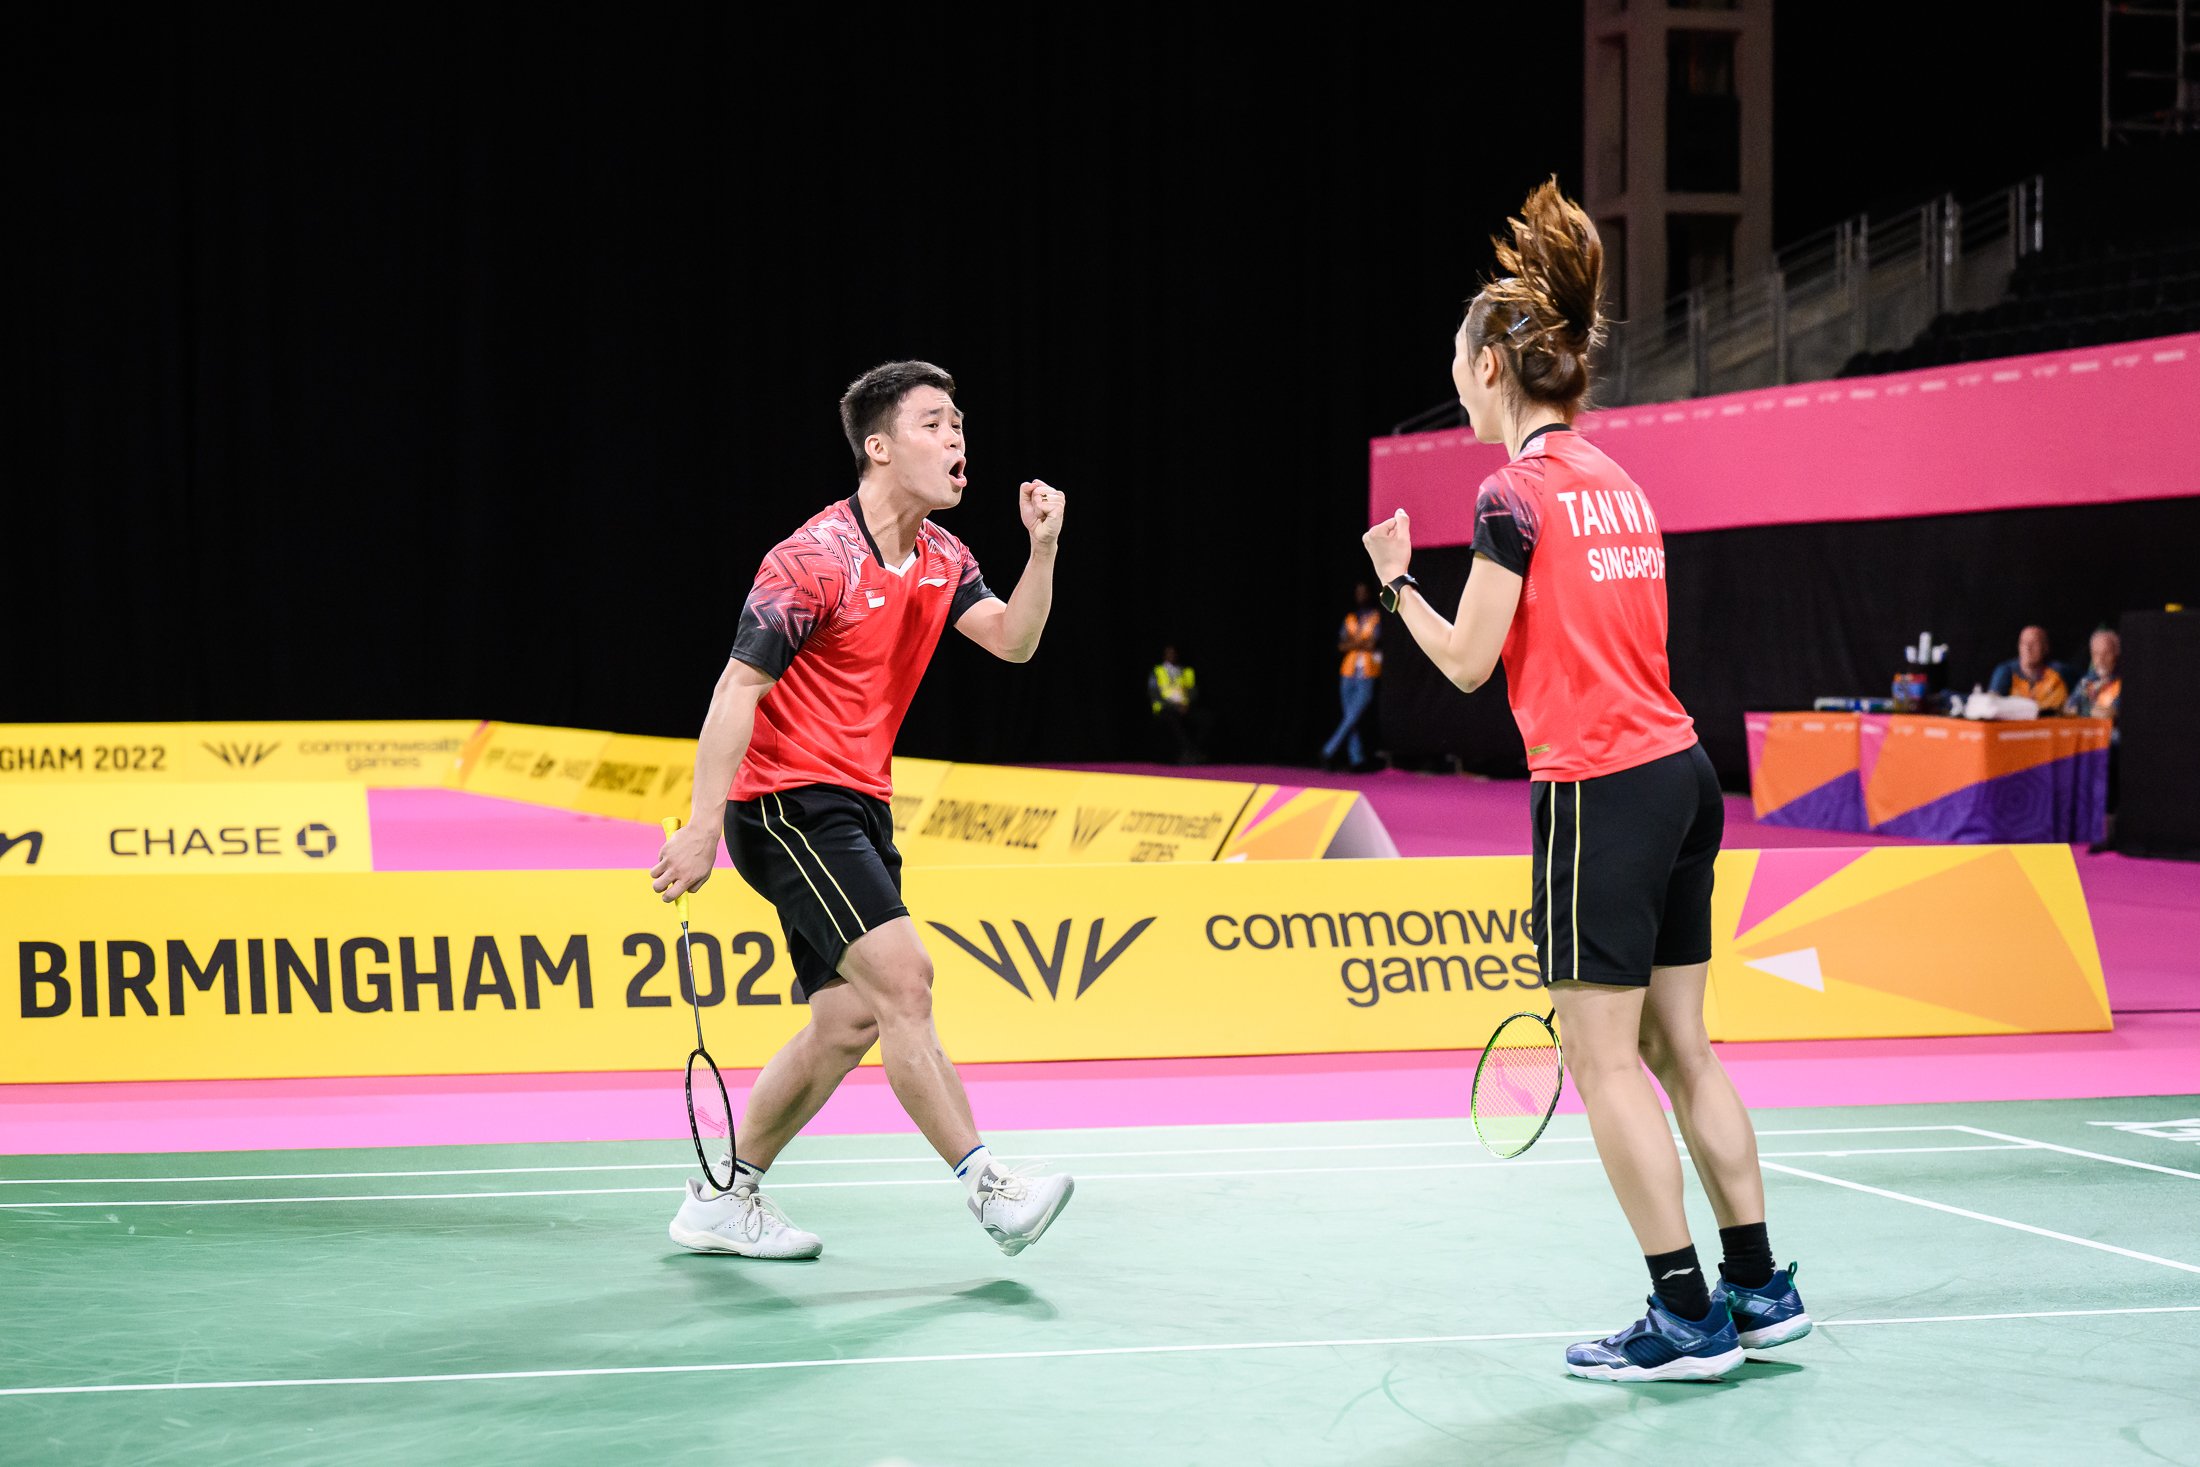 20220807_-_Badminton Photo by Andy Chua_004